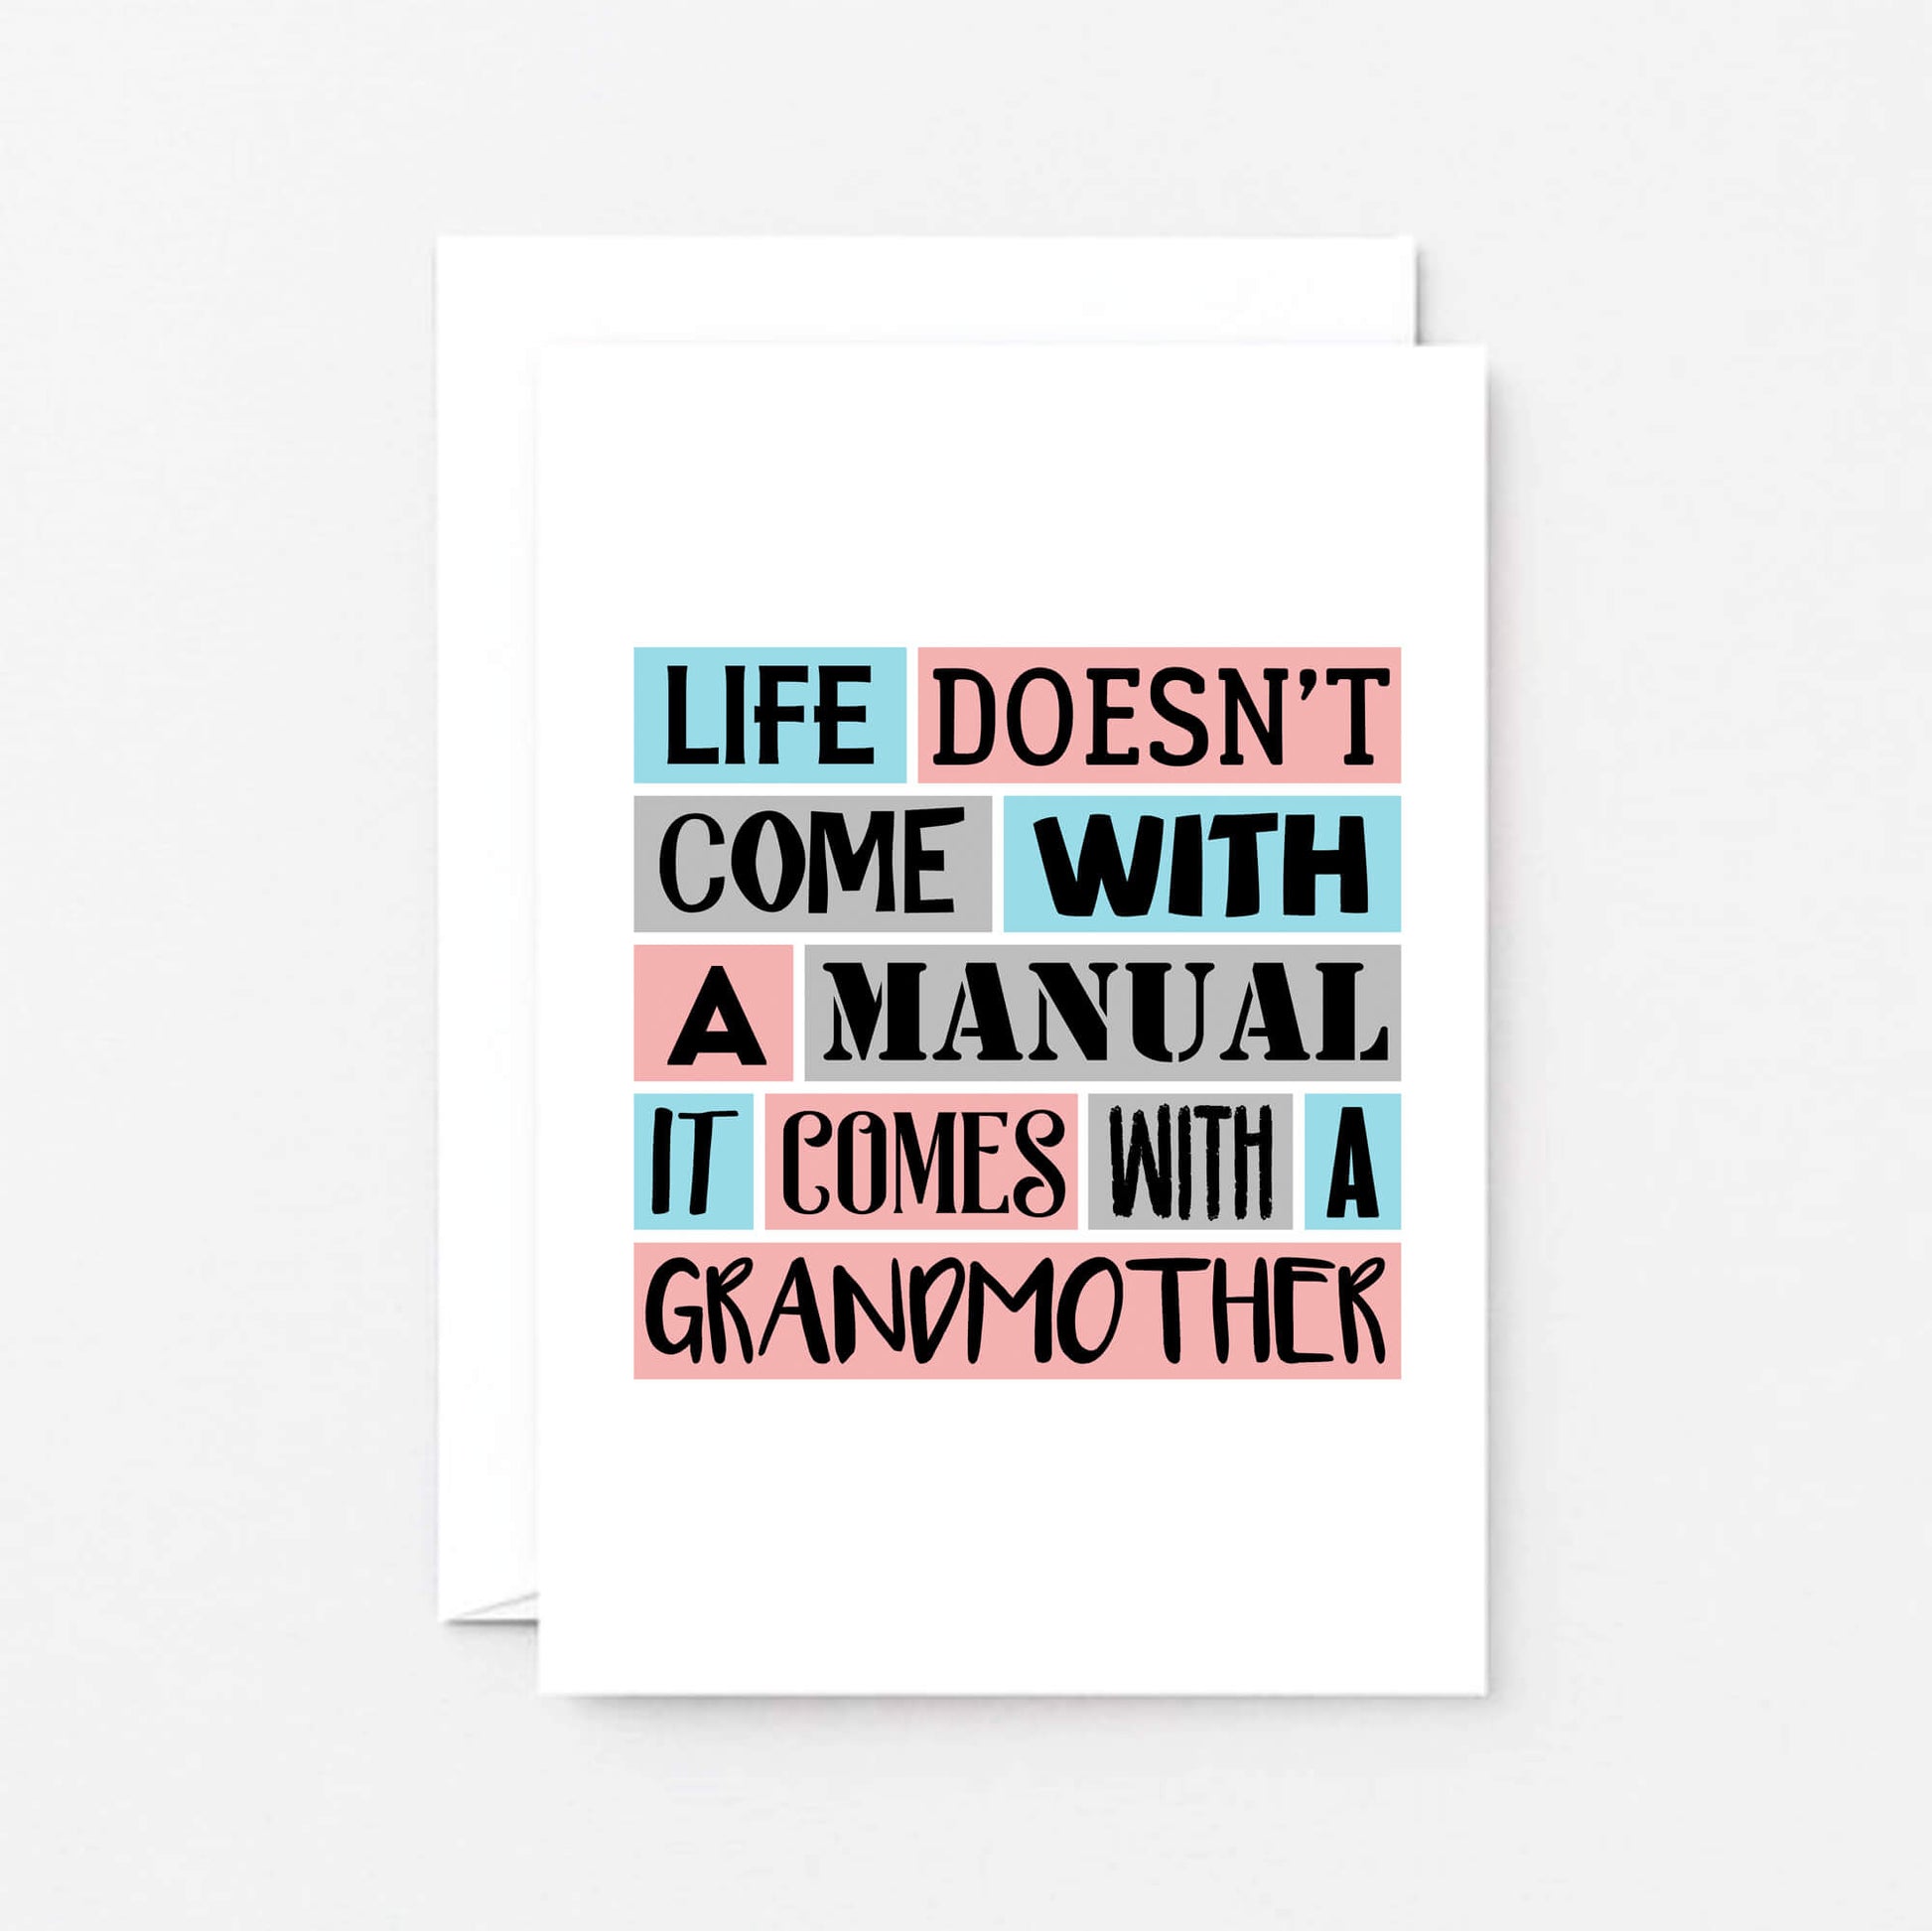 Grandmother Card by SixElevenCreations. Reads Life doesn't come with a manual. It comes with a grandmother. Product Code SE0212A6